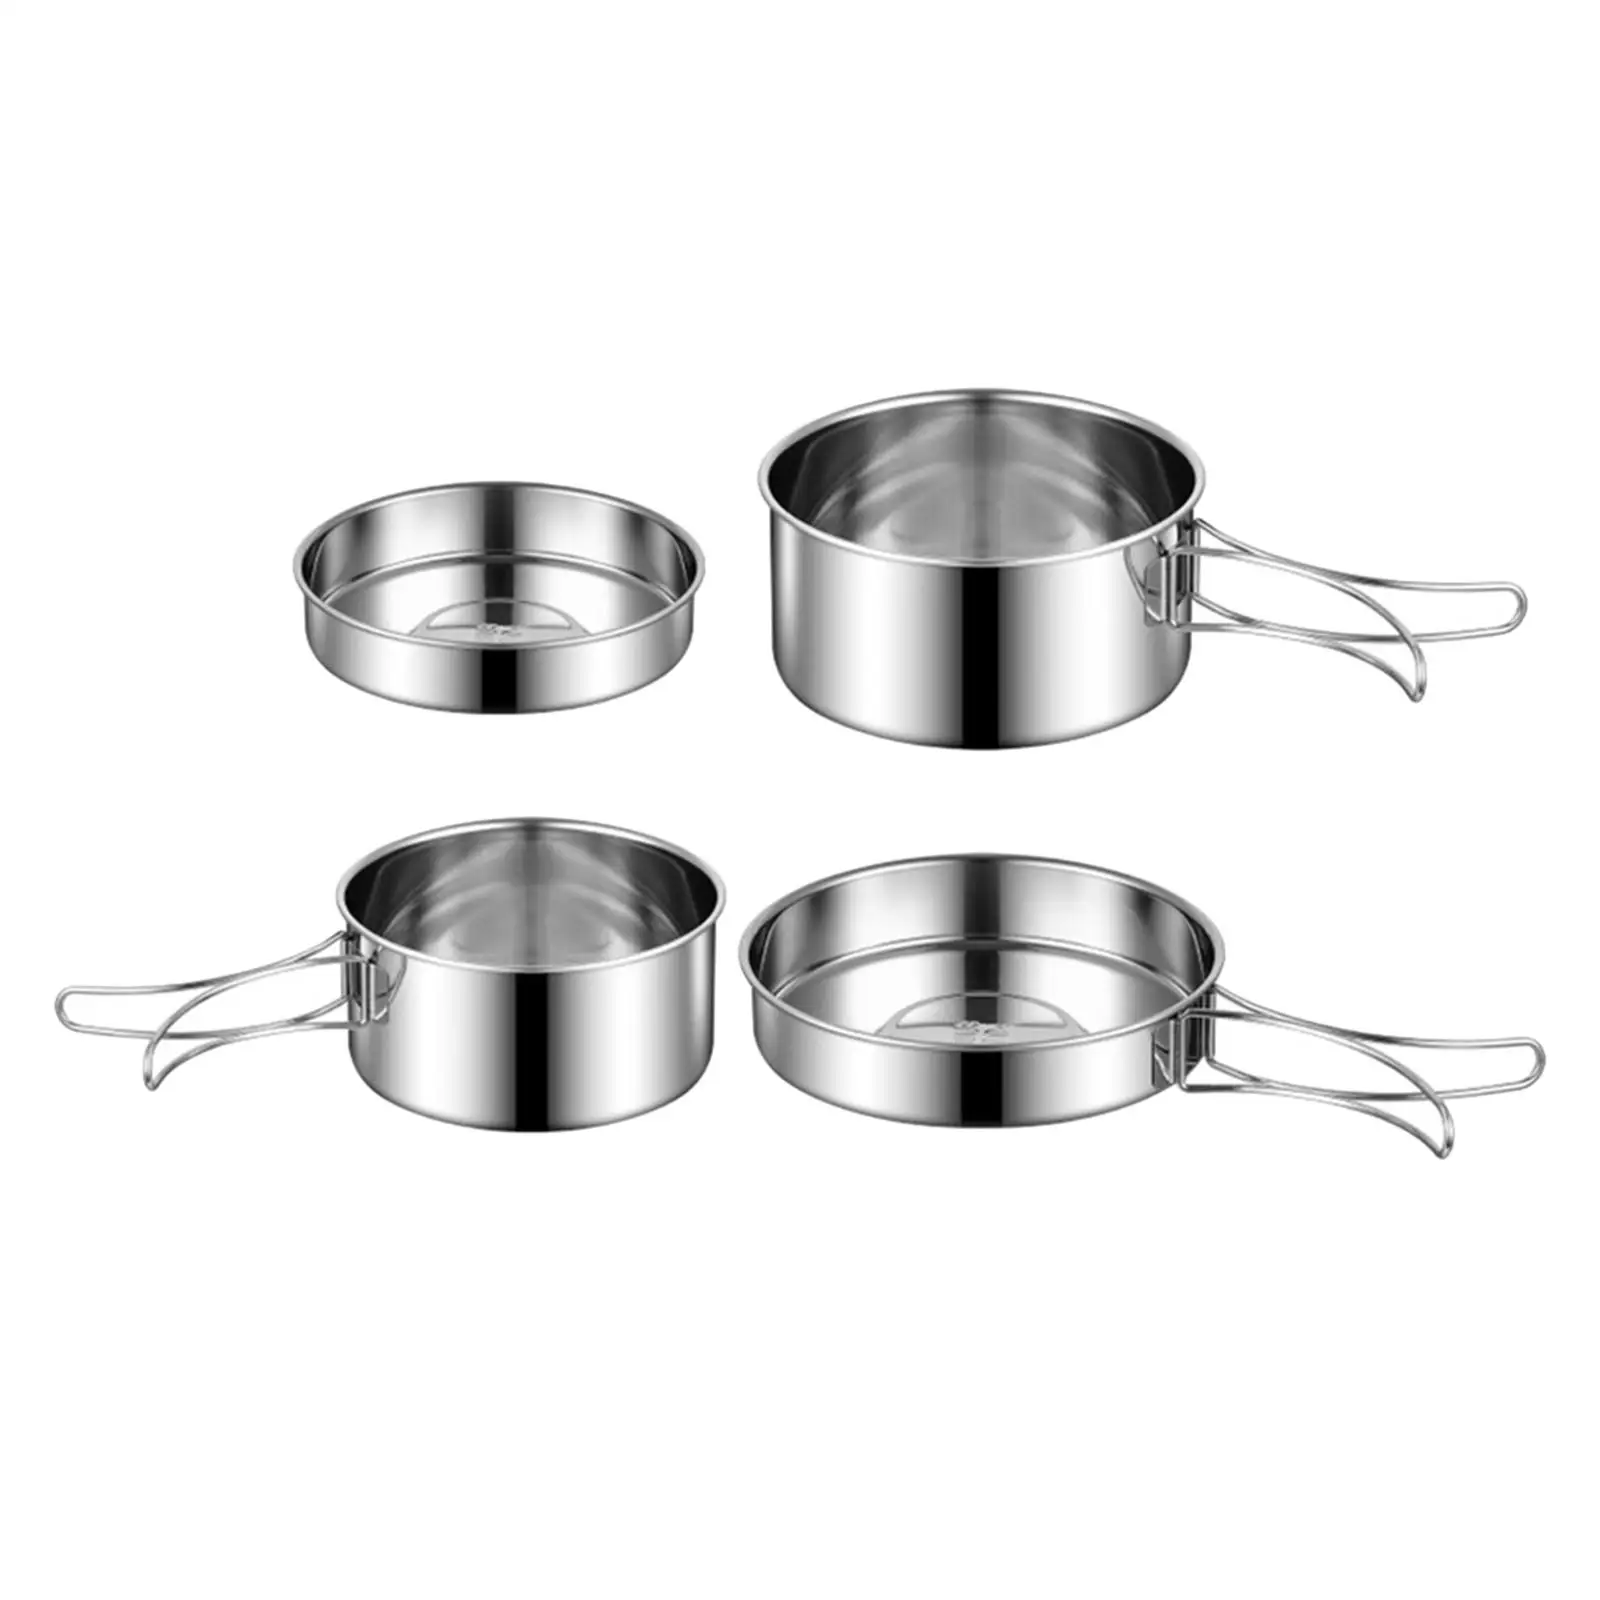 Outdoor Cooking Stockpot Compact Saucepan Kitchen Cooking Pot Camping Cookware for Hiking Camping Backpacking Outdoor Restaurant